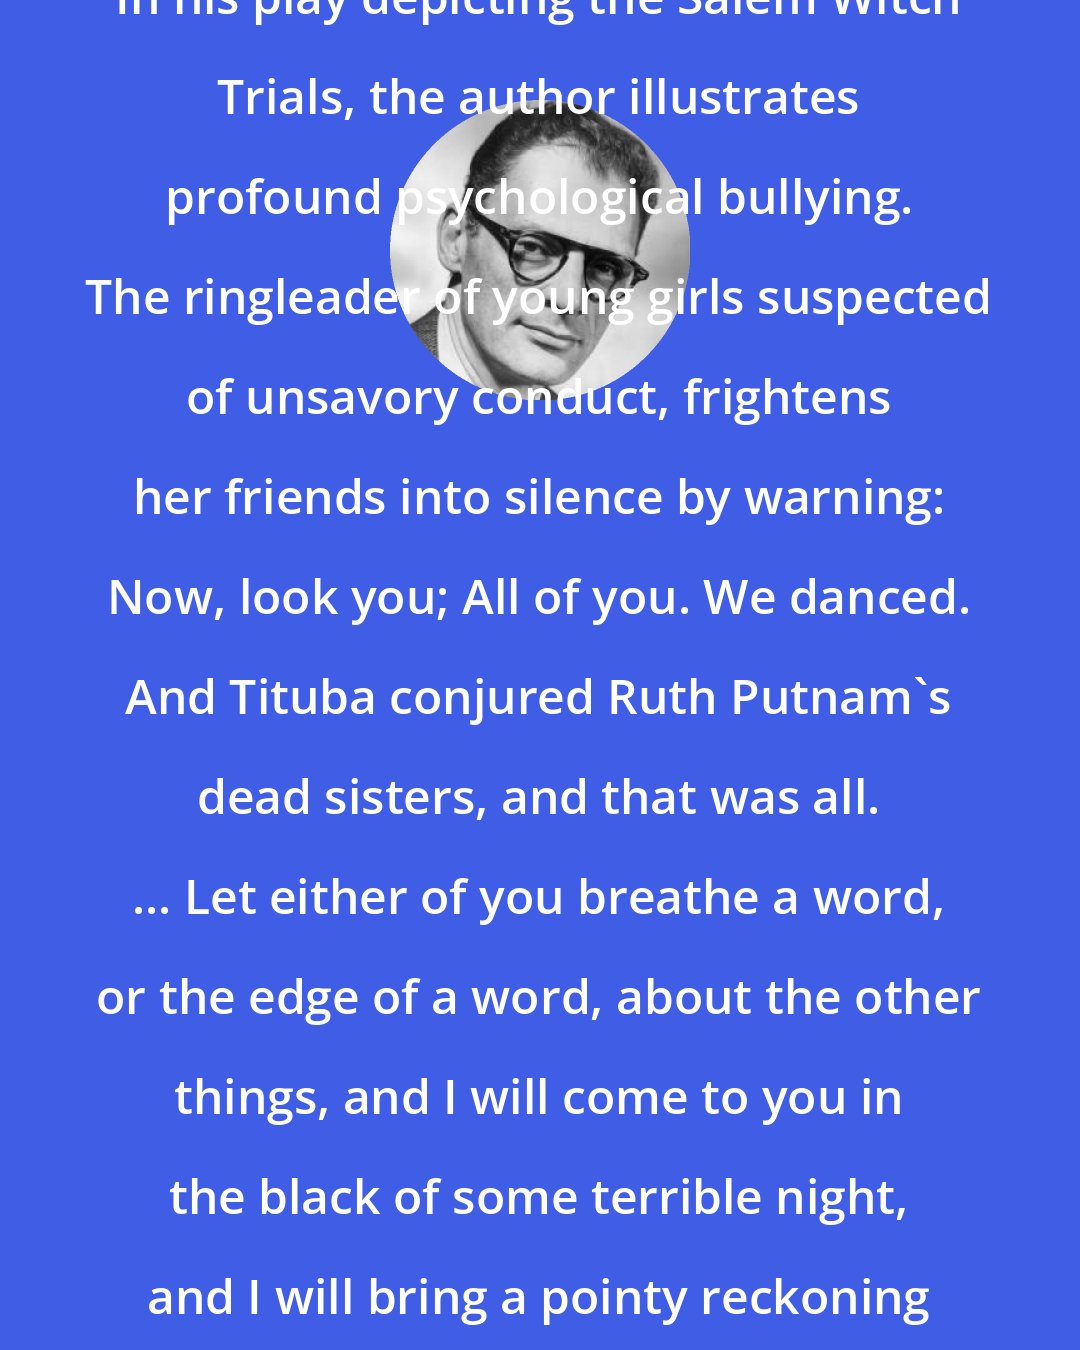 Arthur Miller: In his play depicting the Salem Witch Trials, the author illustrates profound psychological bullying. The ringleader of young girls suspected of unsavory conduct, frightens her friends into silence by warning: Now, look you; All of you. We danced. And Tituba conjured Ruth Putnam's dead sisters, and that was all. ... Let either of you breathe a word, or the edge of a word, about the other things, and I will come to you in the black of some terrible night, and I will bring a pointy reckoning that will shudder you.